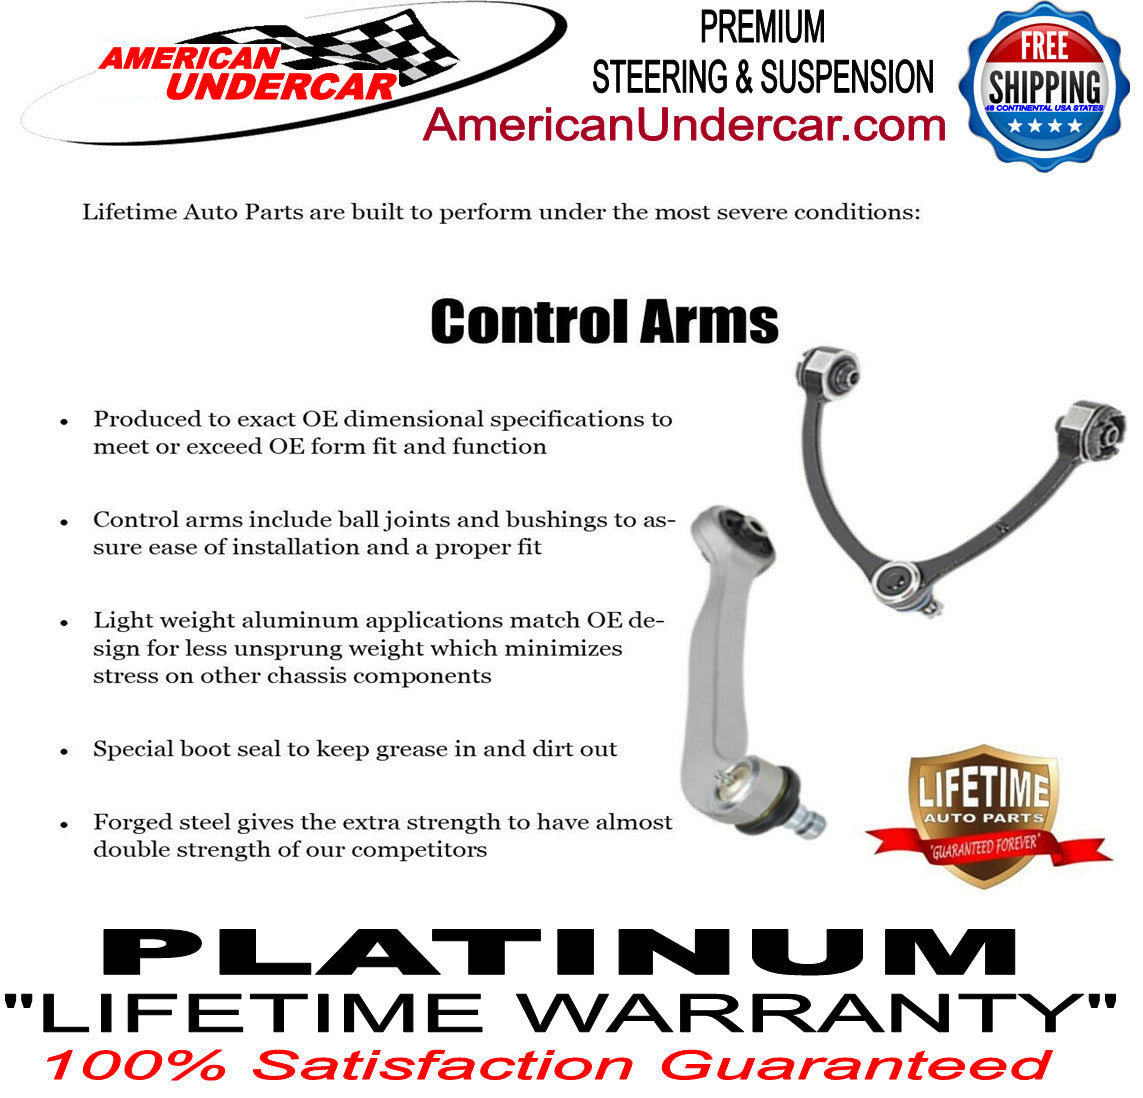 Lifetime Drag Link Tie Rod Sleeve Steering Kit for 1999-2004 Ford F250 Super Duty 2WD